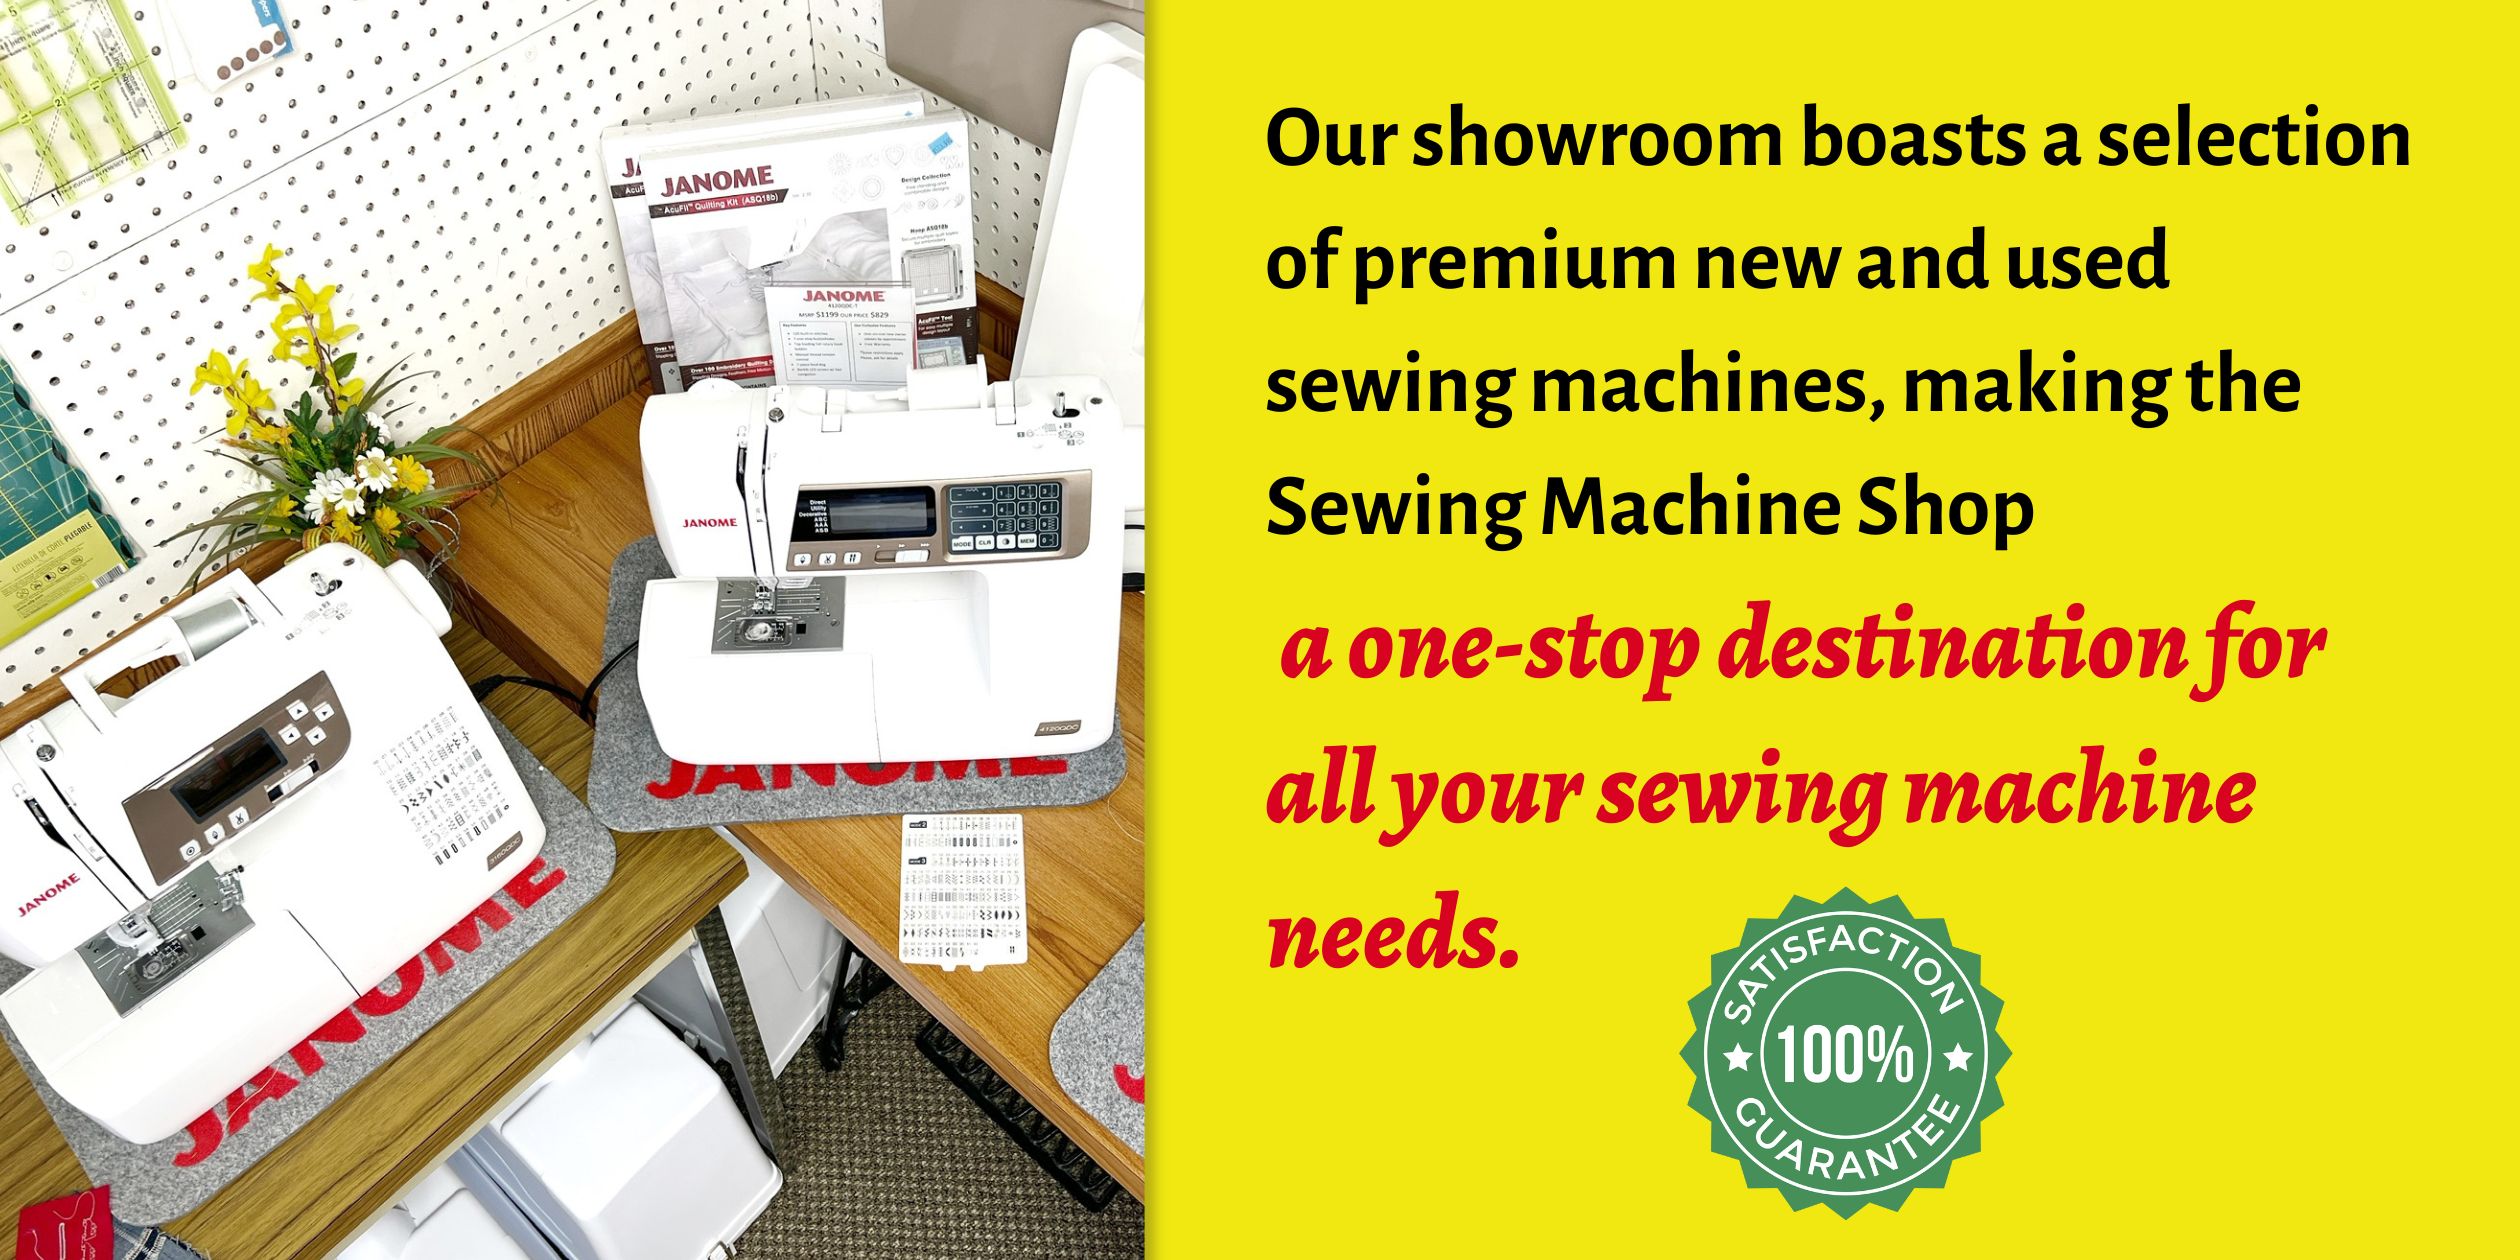 Our showroom boasts a selection of premium new and used sewing machines, making the Sewing Machine Shop a one-stop destination for all your sewing machine needs.